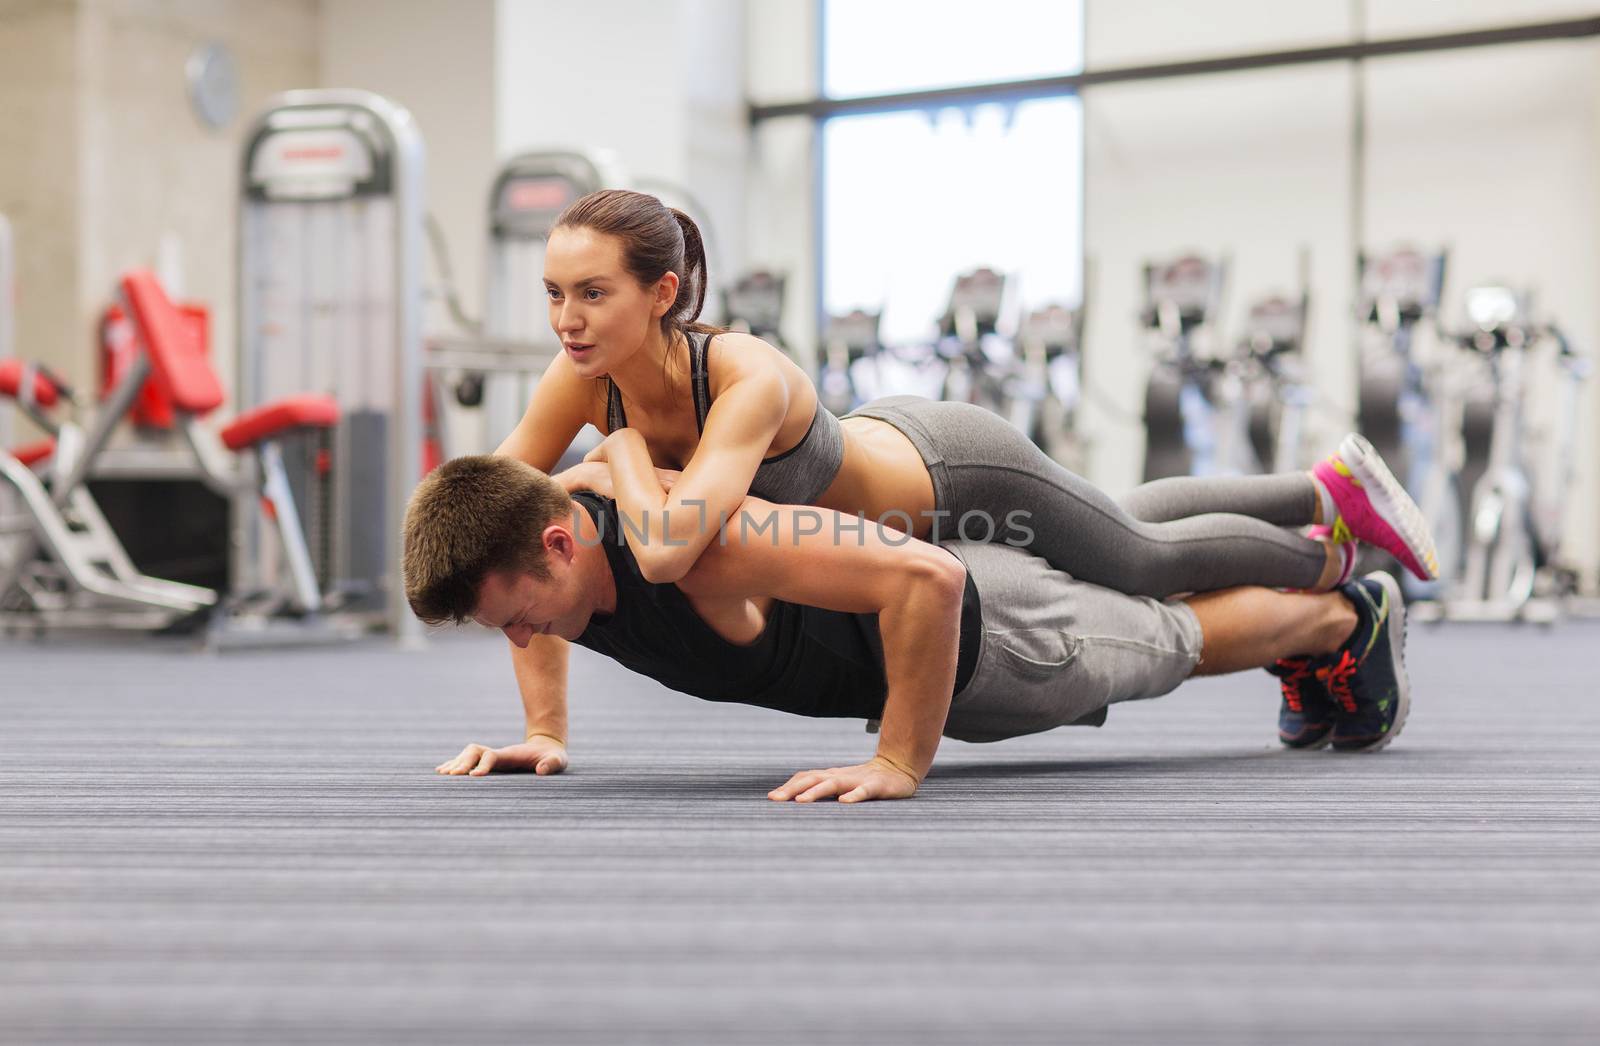 fitness, sport, training, teamwork and lifestyle concept - smiling couple doing push-ups in the gym